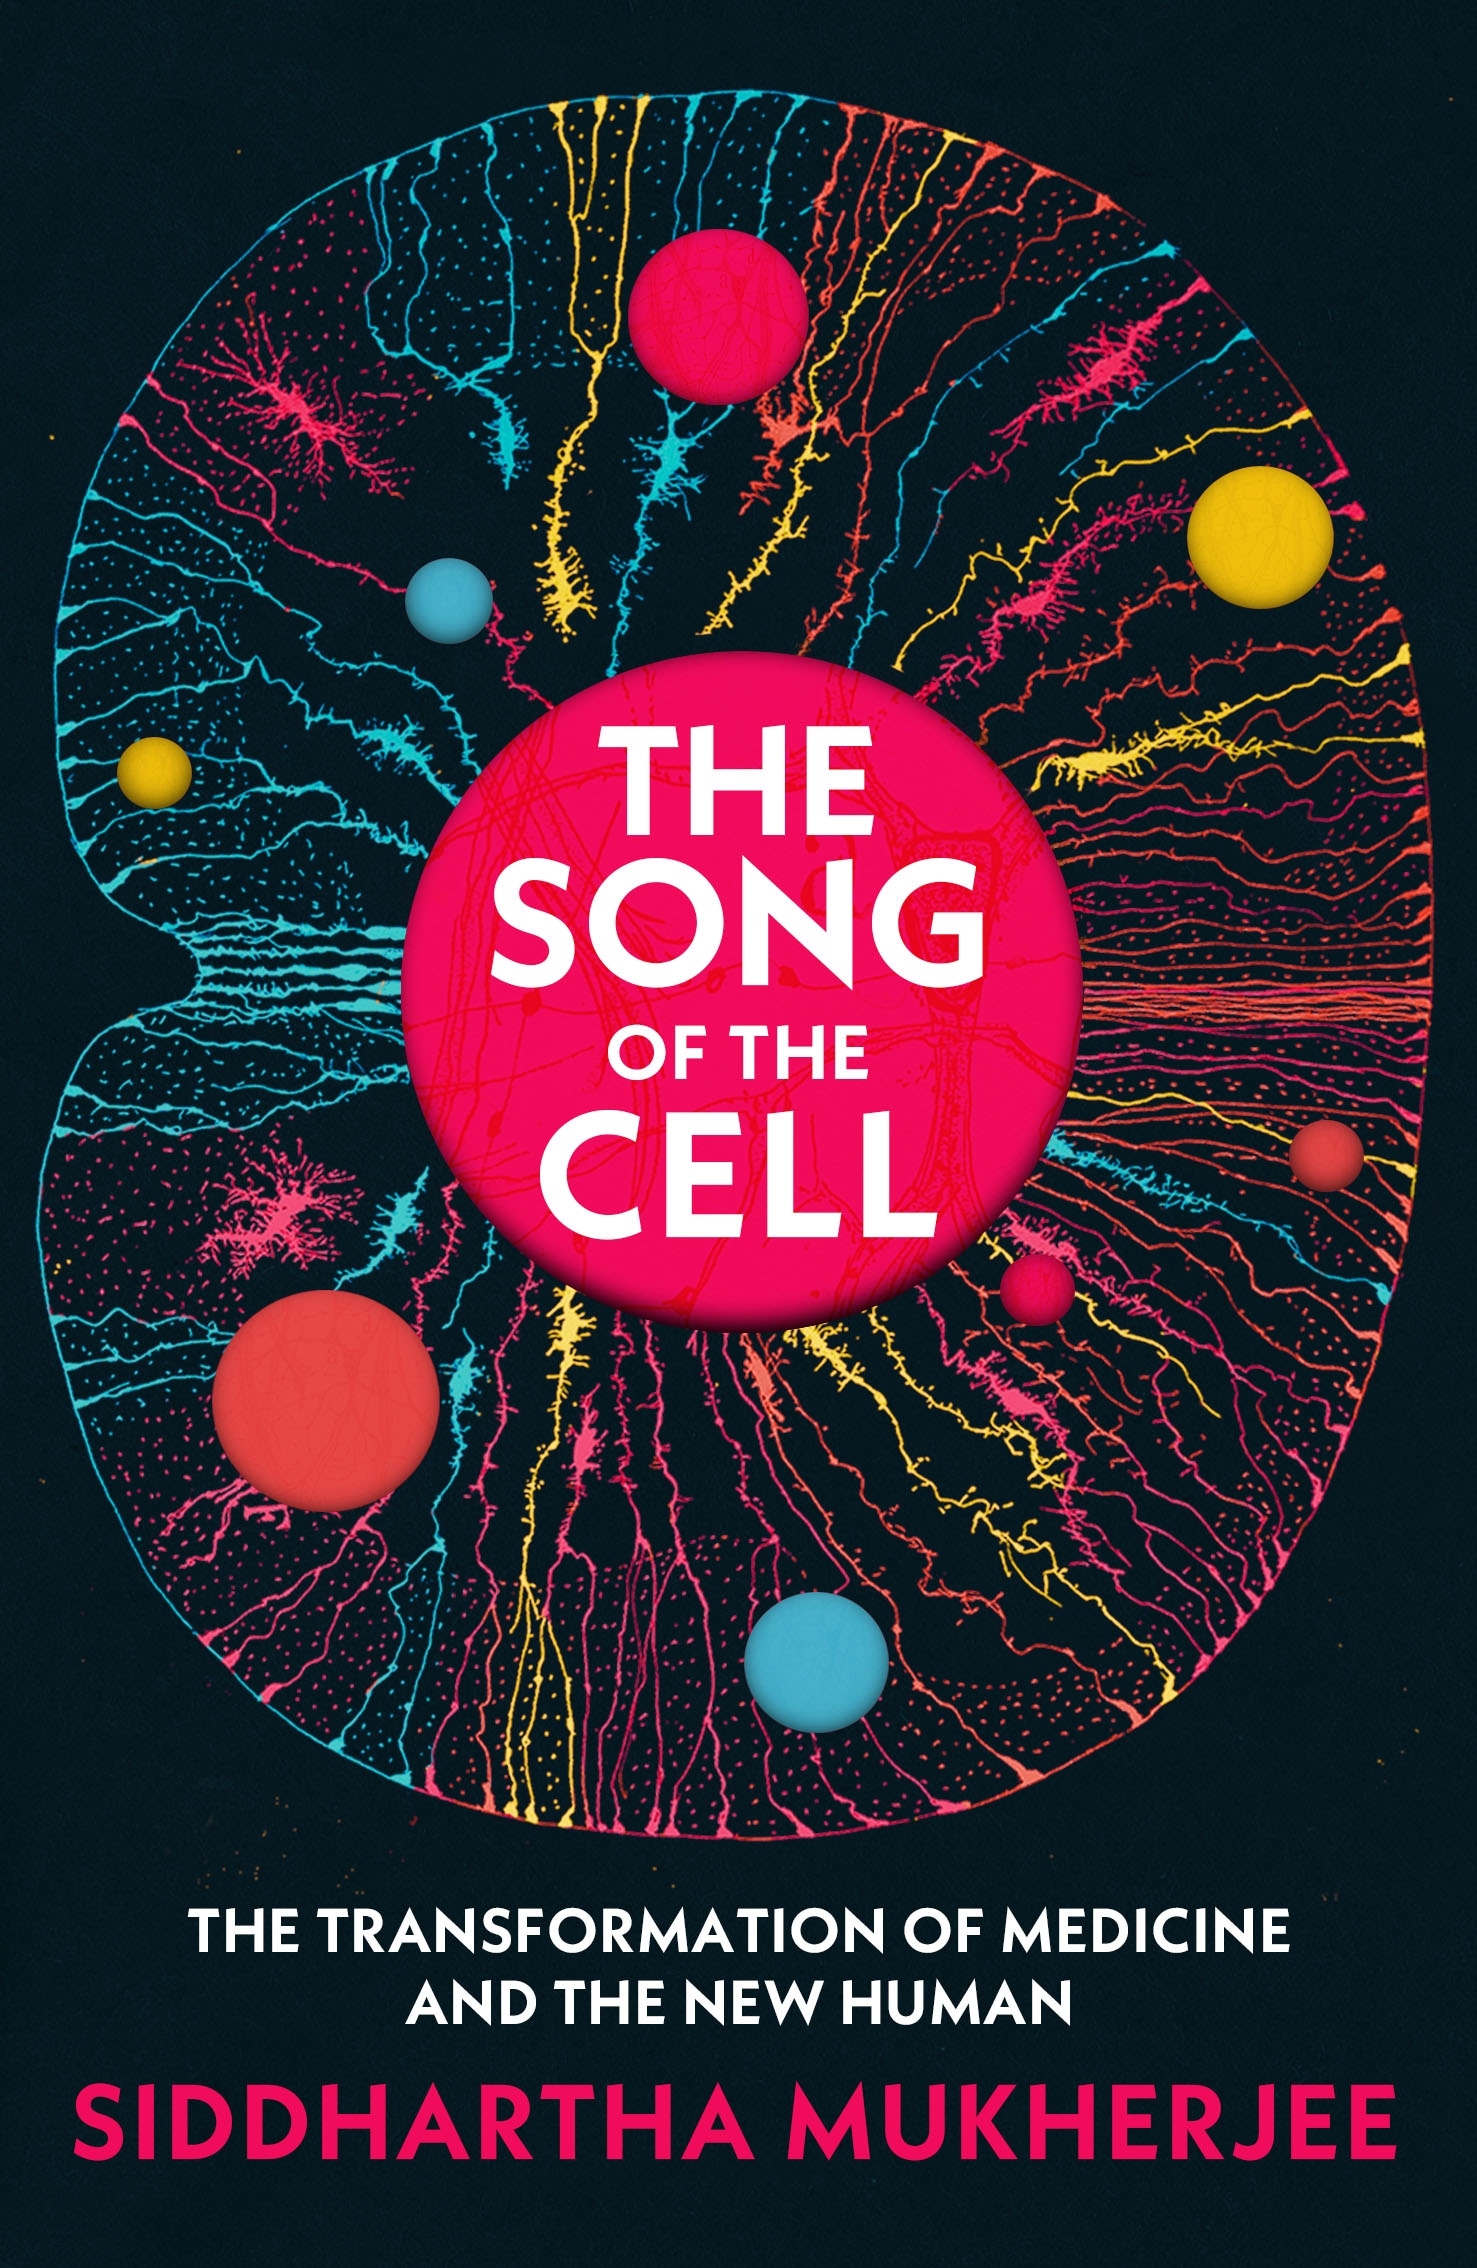 Book “The Song of the Cell” by Siddhartha Mukherjee — November 3, 2022